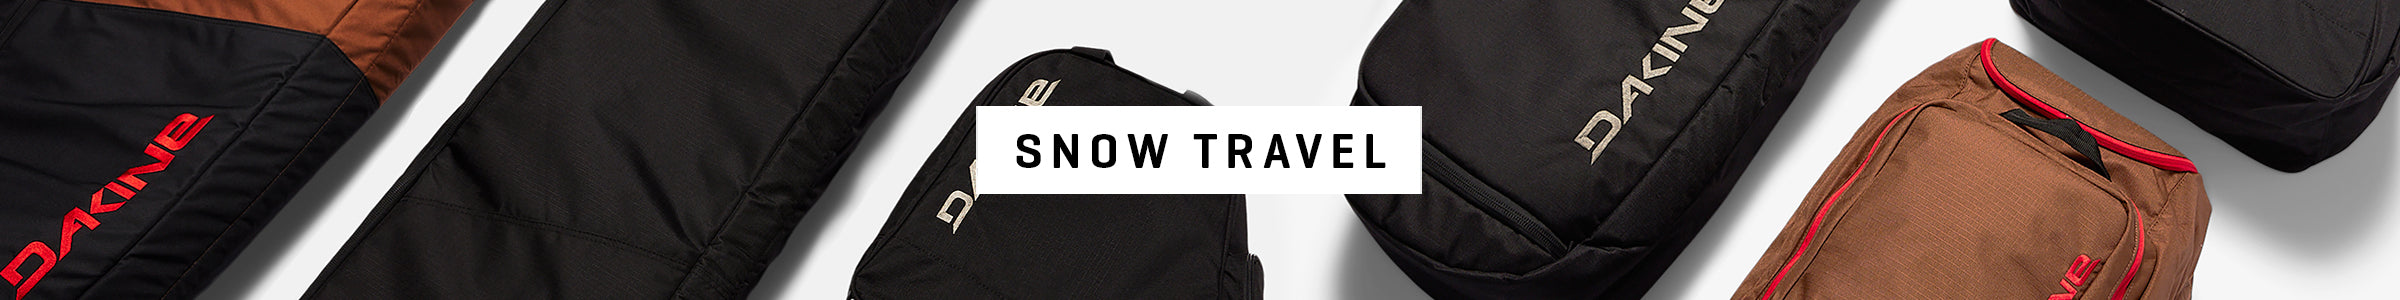 Snowboard Travel Bags